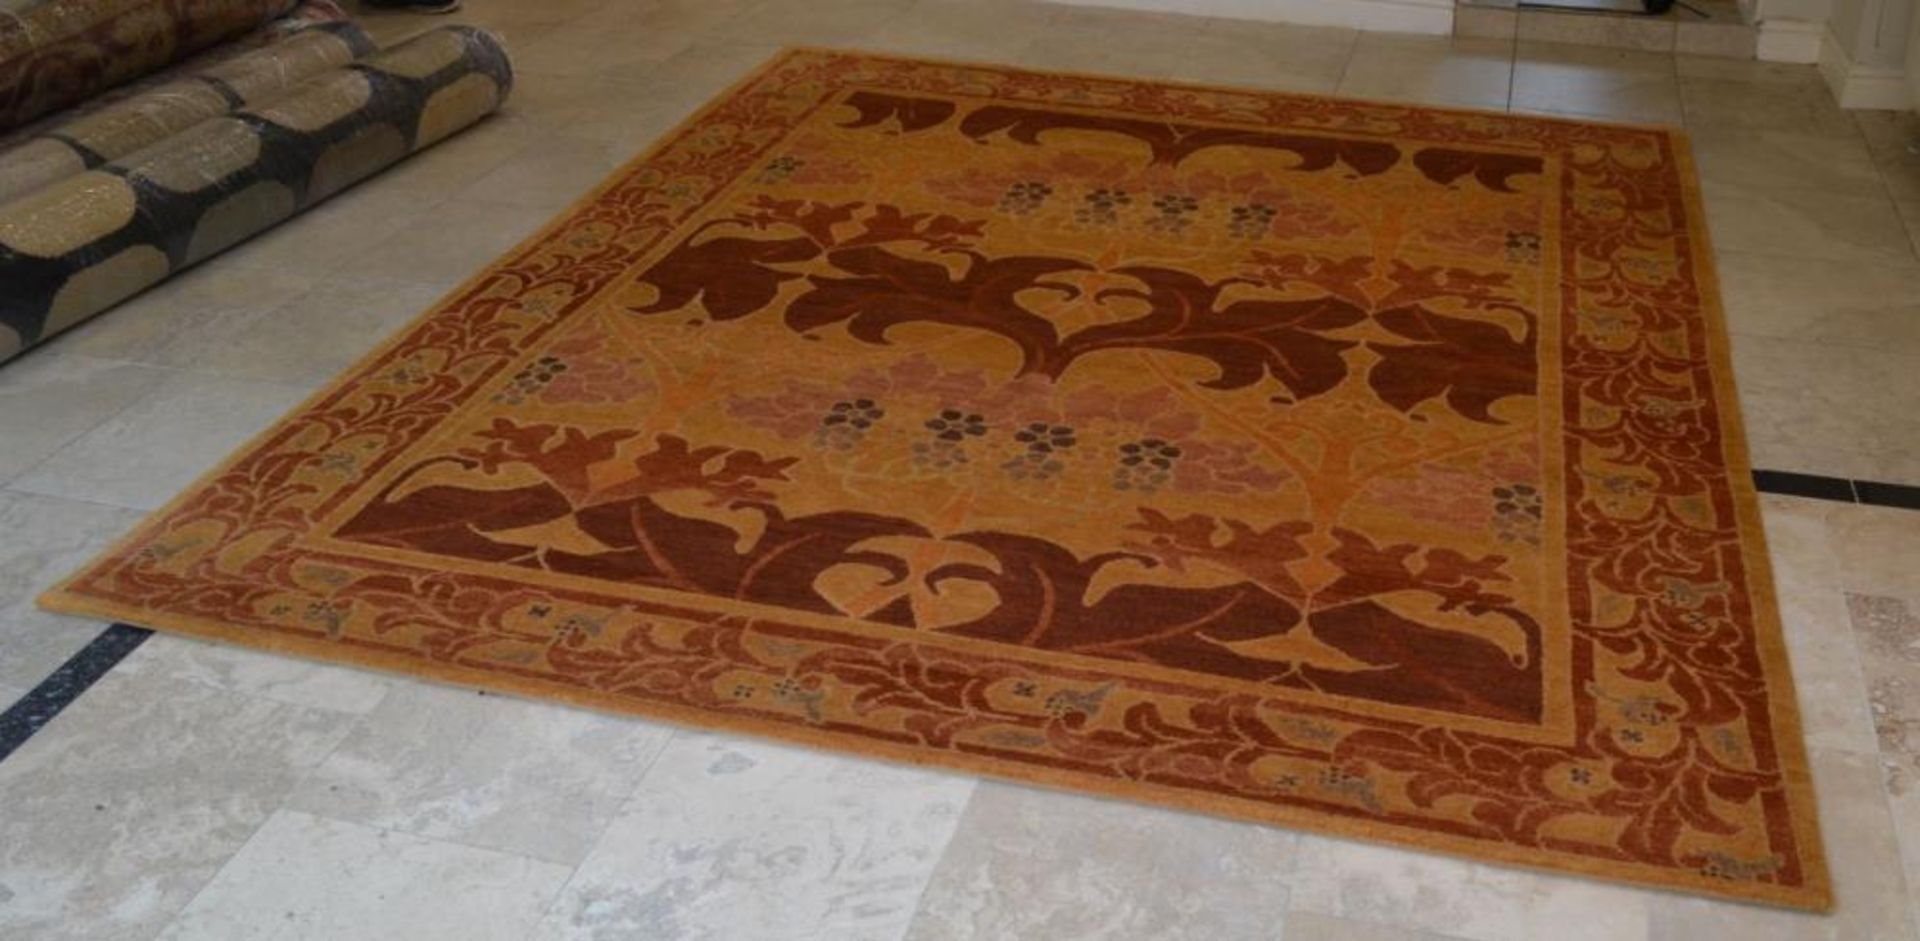 1 x Nepalese Terracotta Arts & Crafts Design Hand Knotted Rug - 100% Handspun Wool - Dimensions: - Image 6 of 18